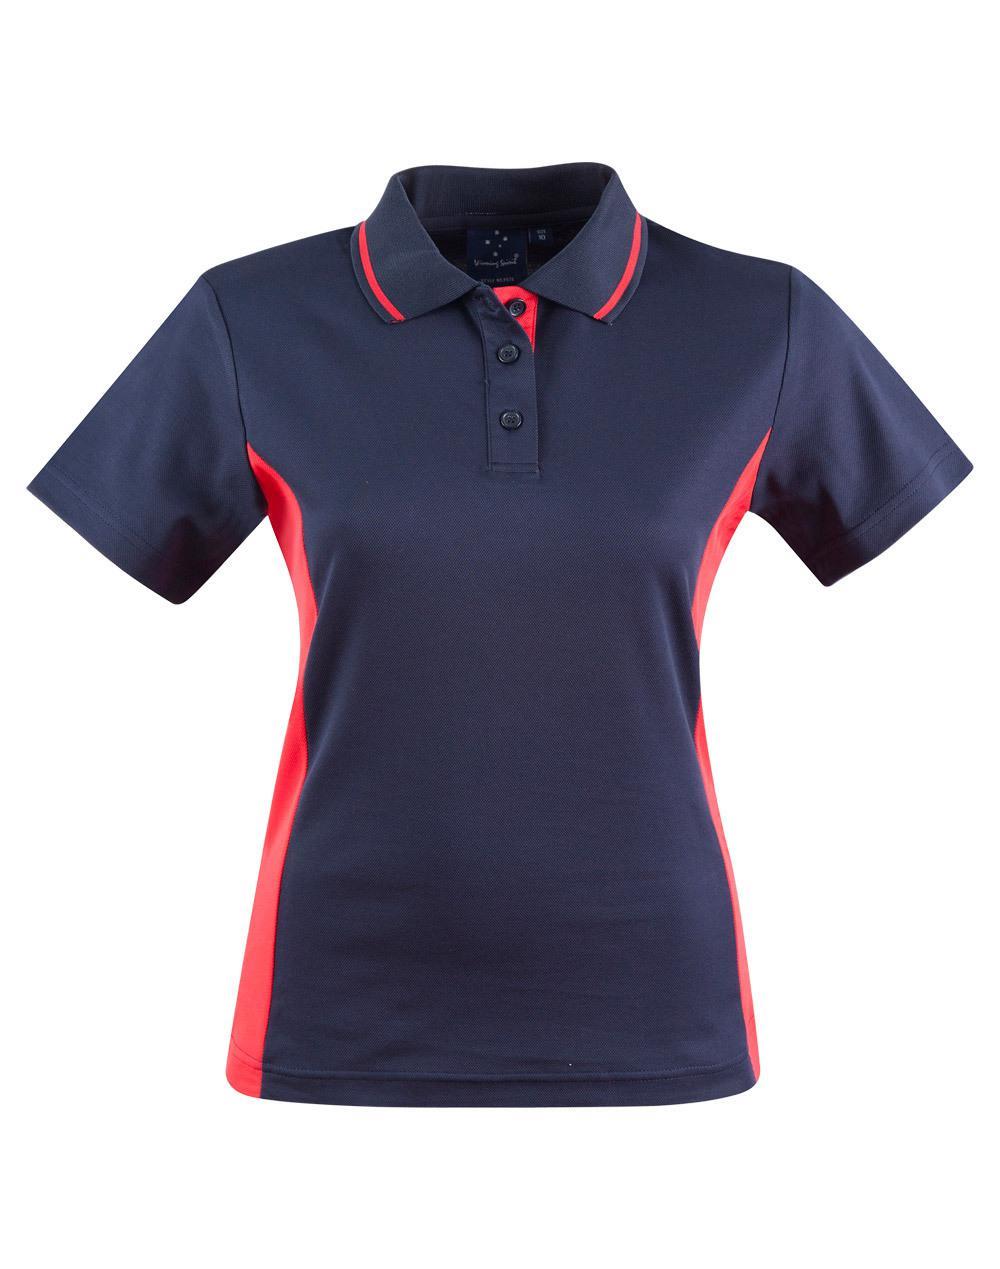 PS74 Sz 10 TEAMMATE Cotton Polyester Ladies Polo Shirt Navy/Red